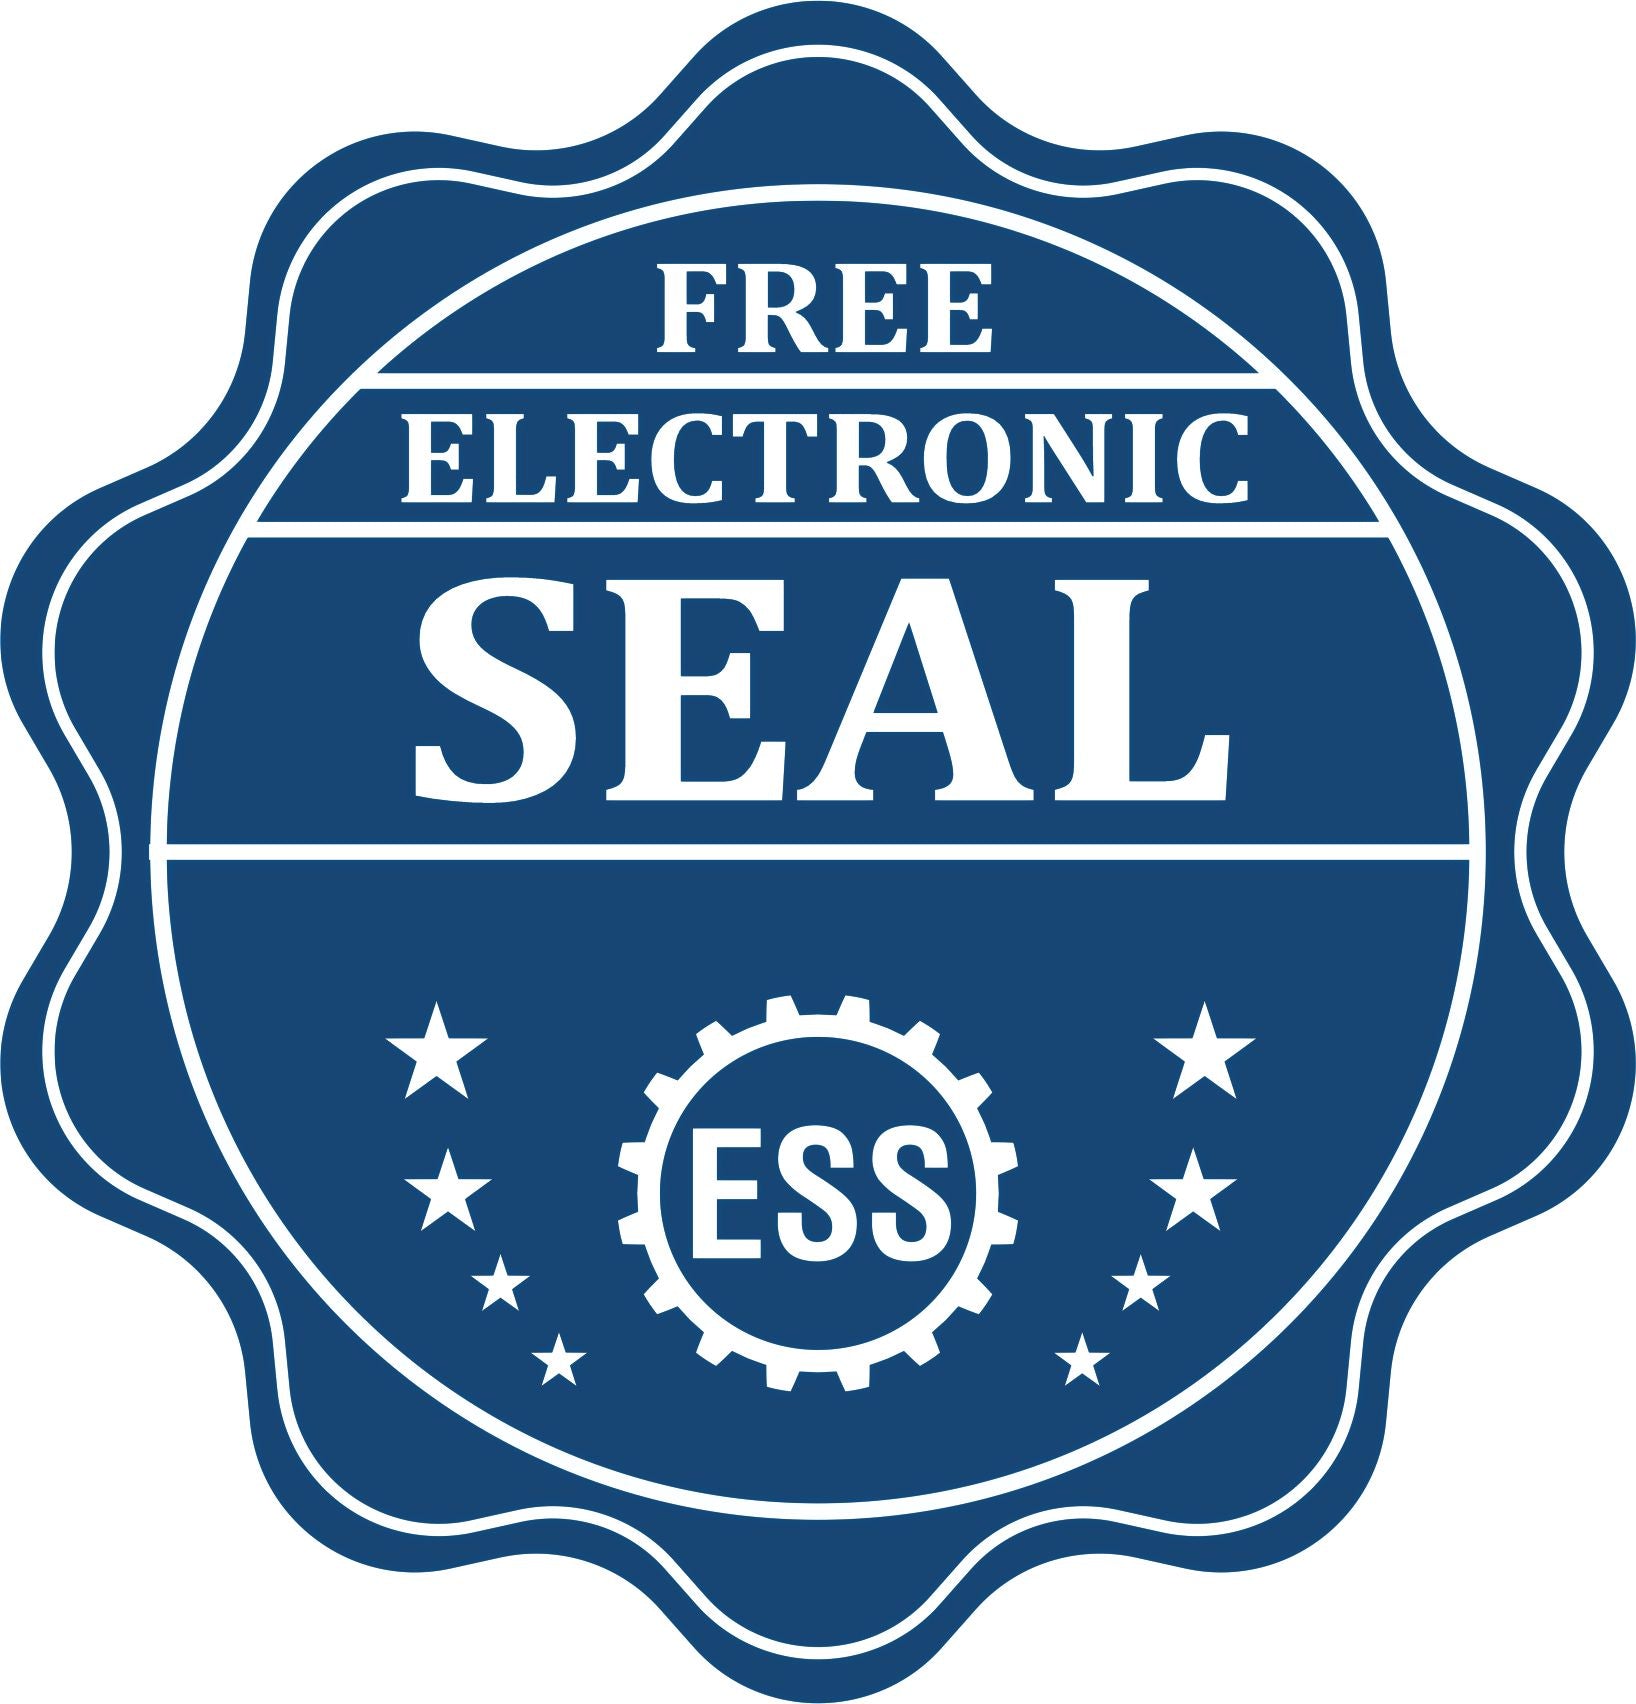 A badge showing a free electronic seal for the Extended Long Reach Iowa Surveyor Embosser with stars and the ESS gear on the emblem.